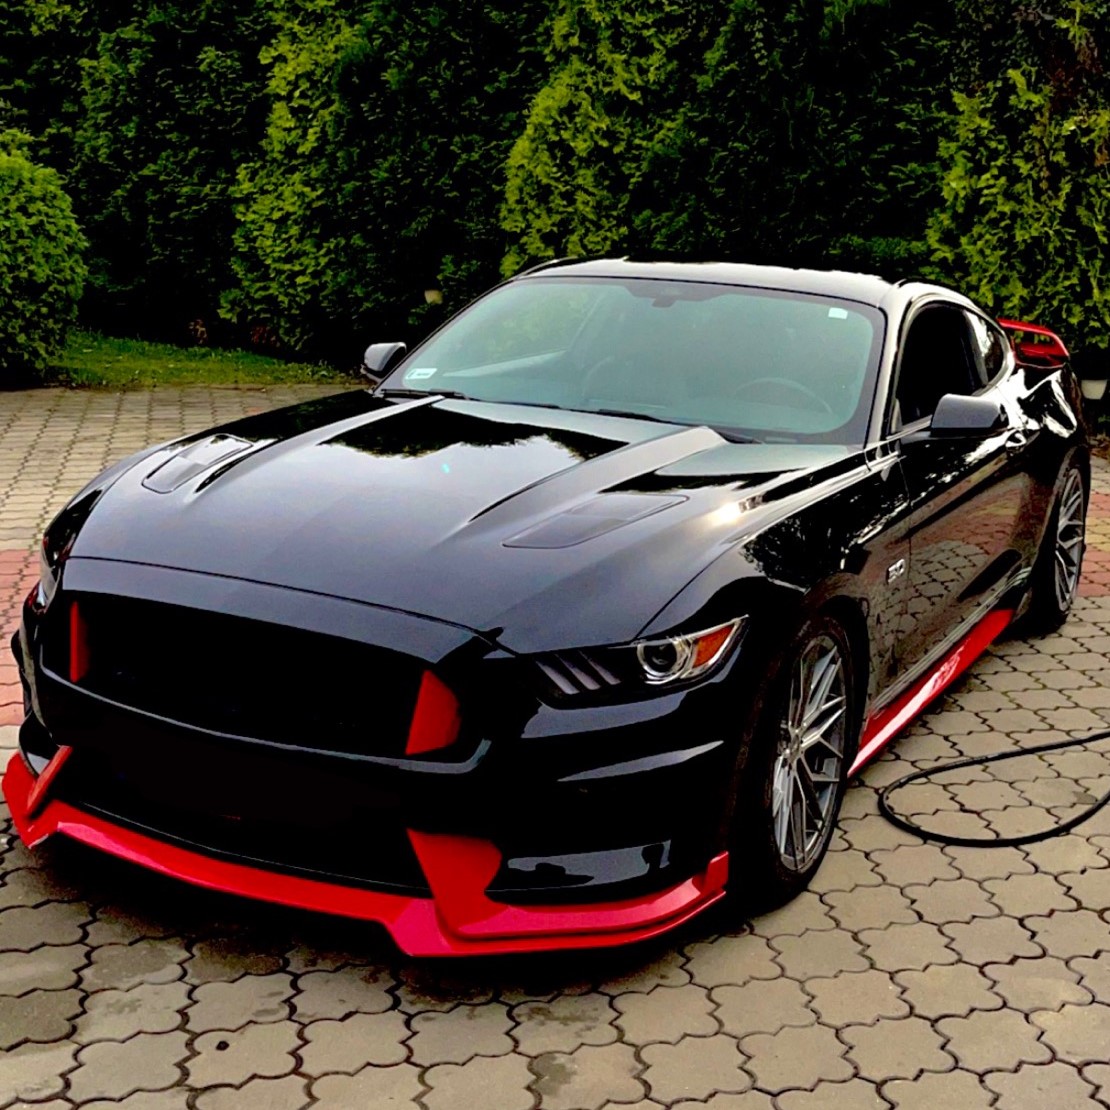 Ford Mustang GT 2016 Auta z USA